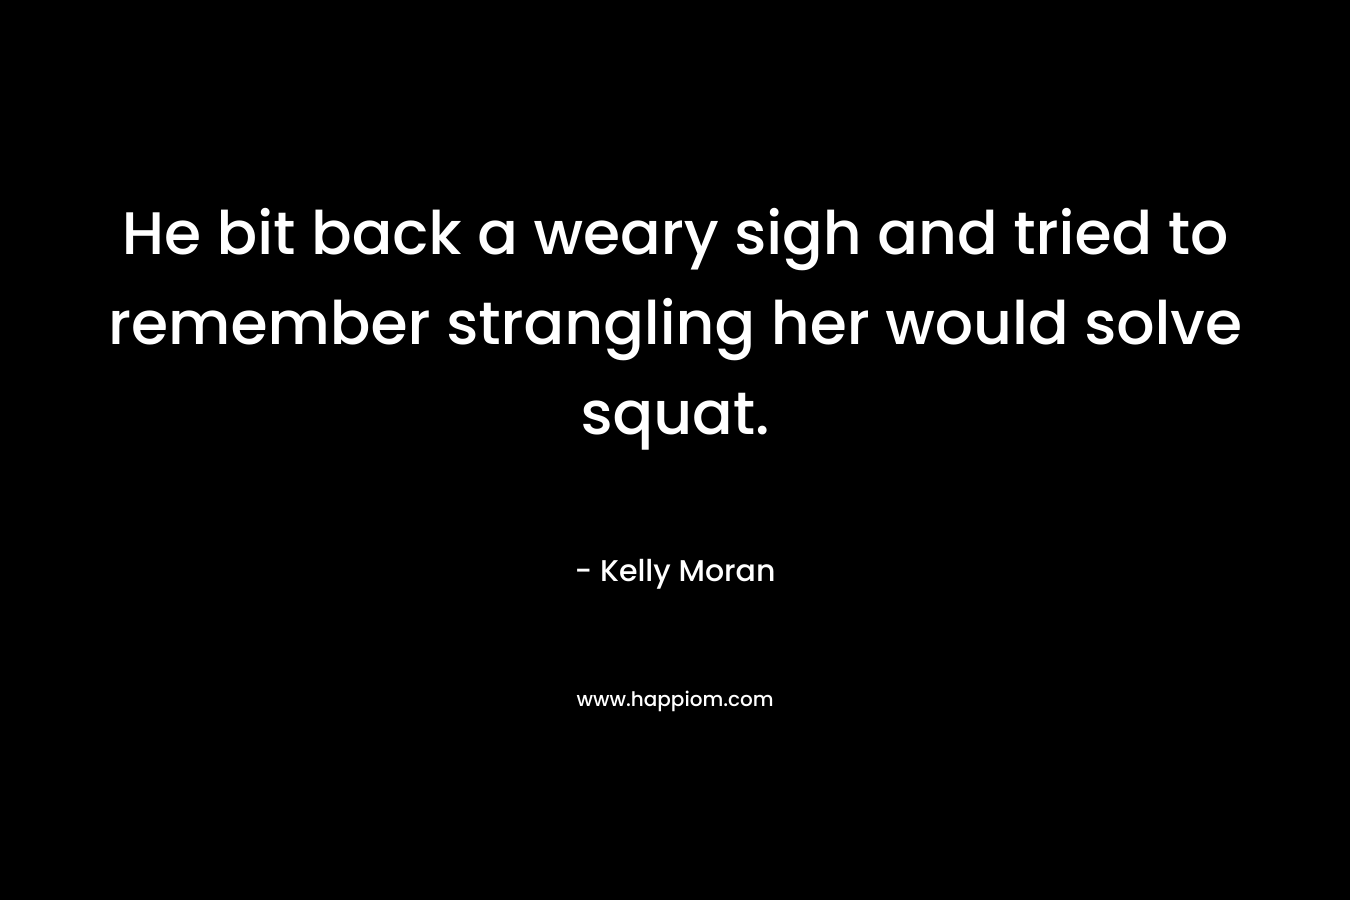 He bit back a weary sigh and tried to remember strangling her would solve squat. – Kelly Moran